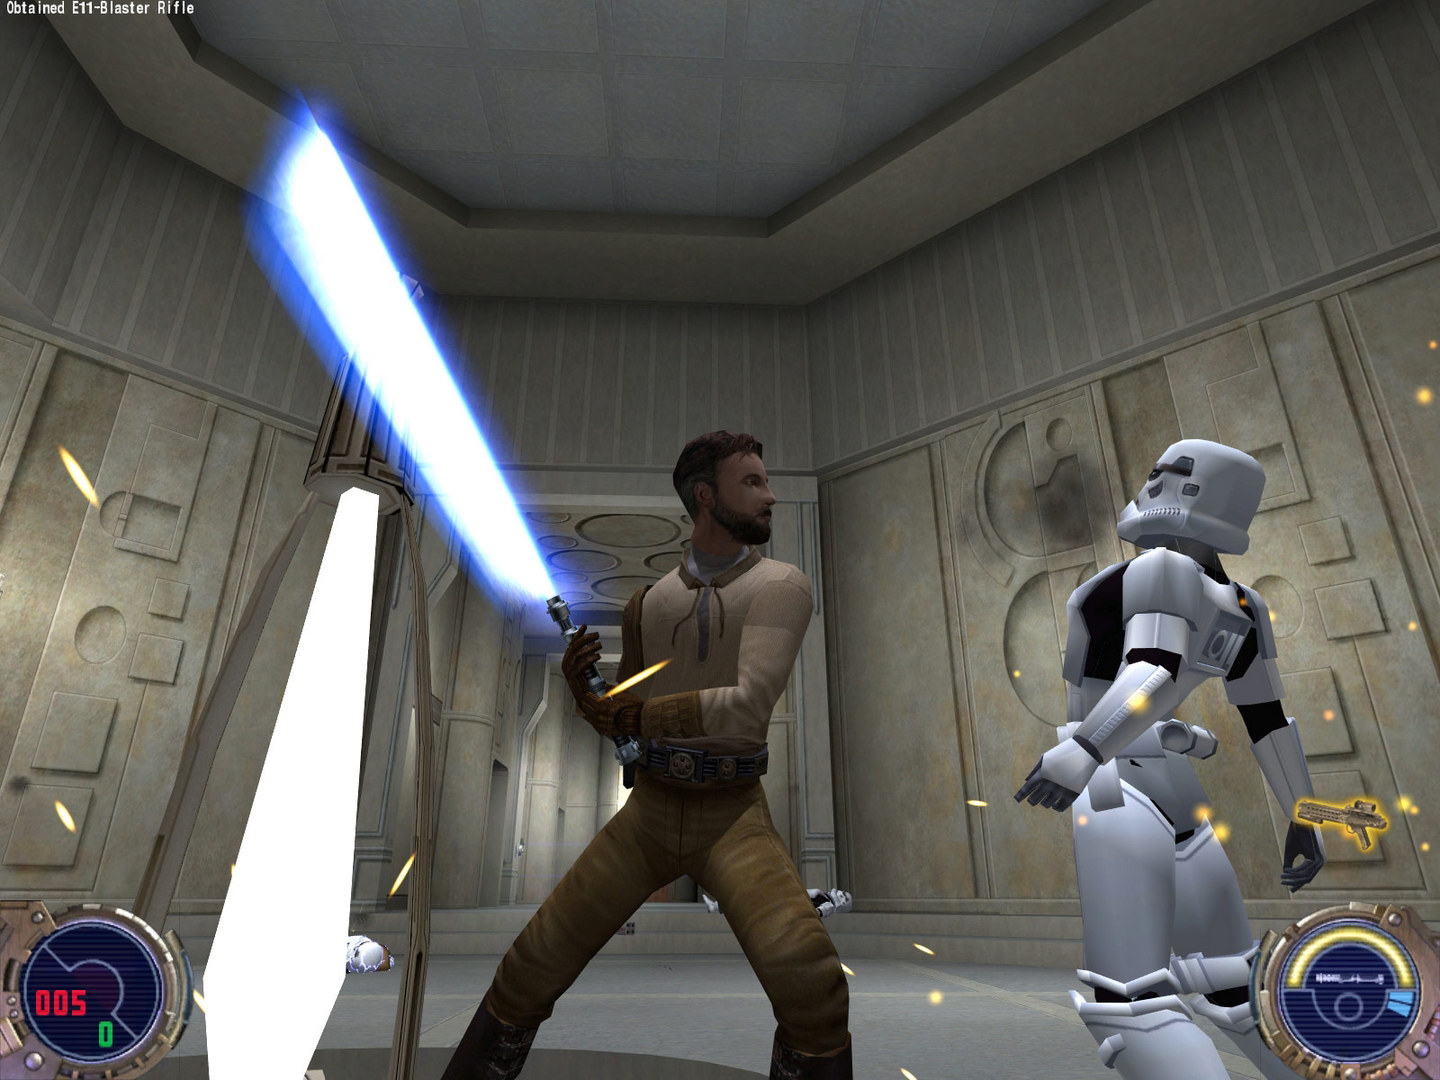 jedi outcast multiplayer disable lightsabers